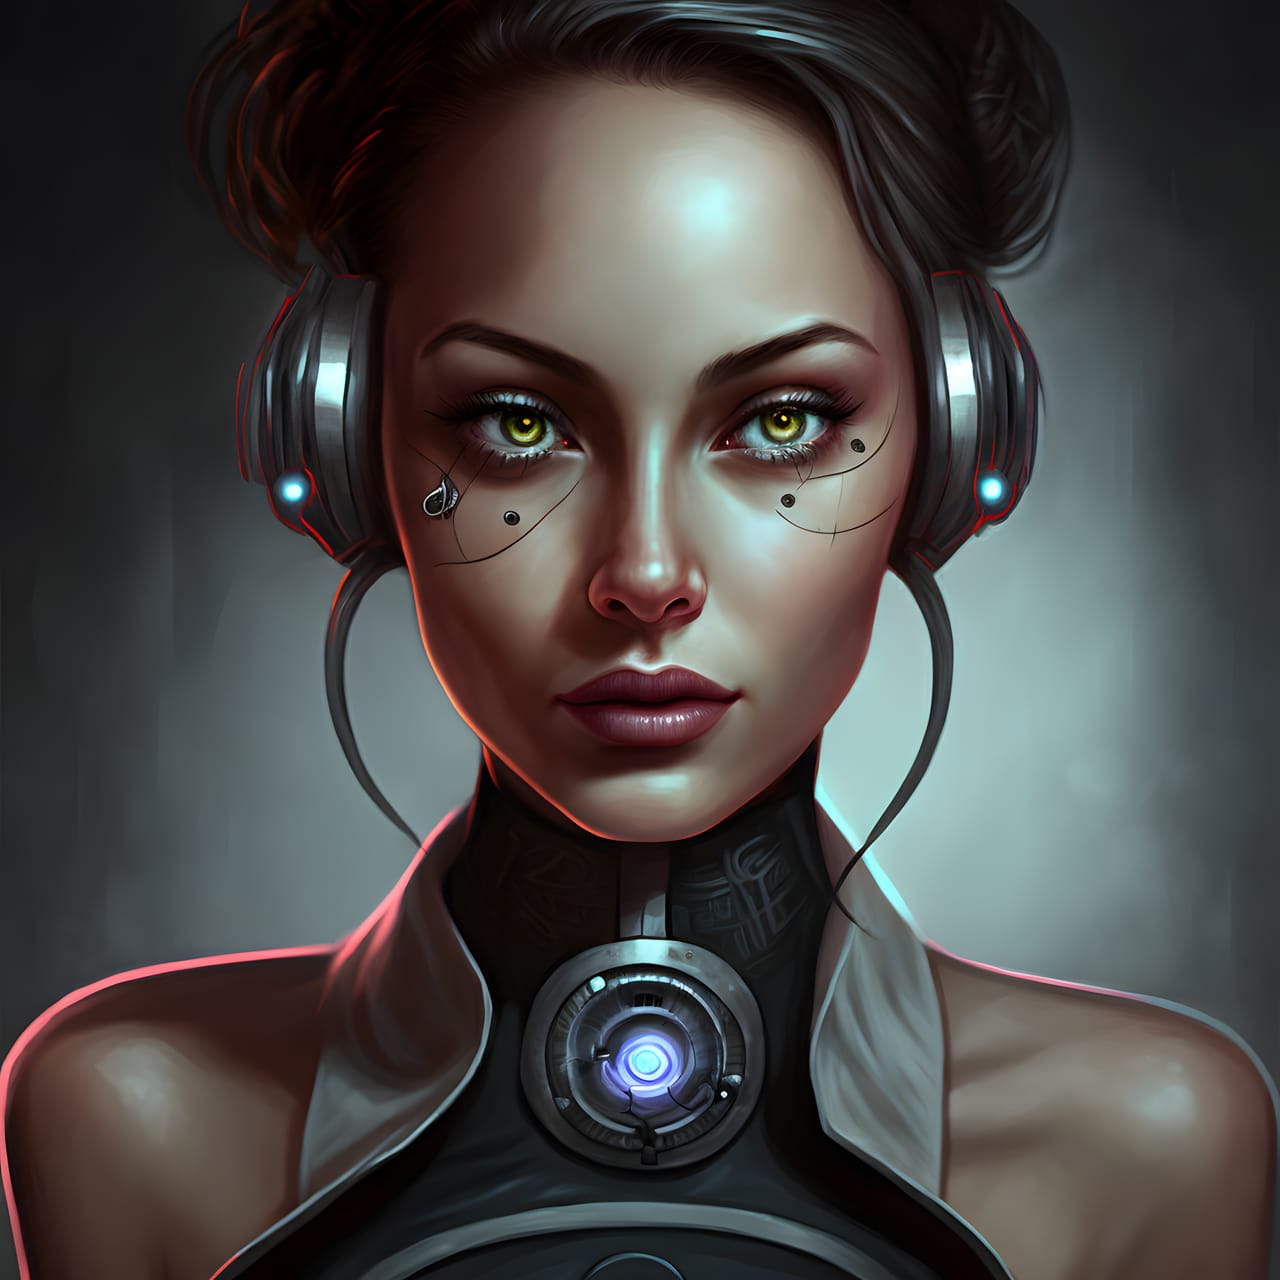 Related image young caucasian woman futuristic cybernetic dress headphones neural network generated art